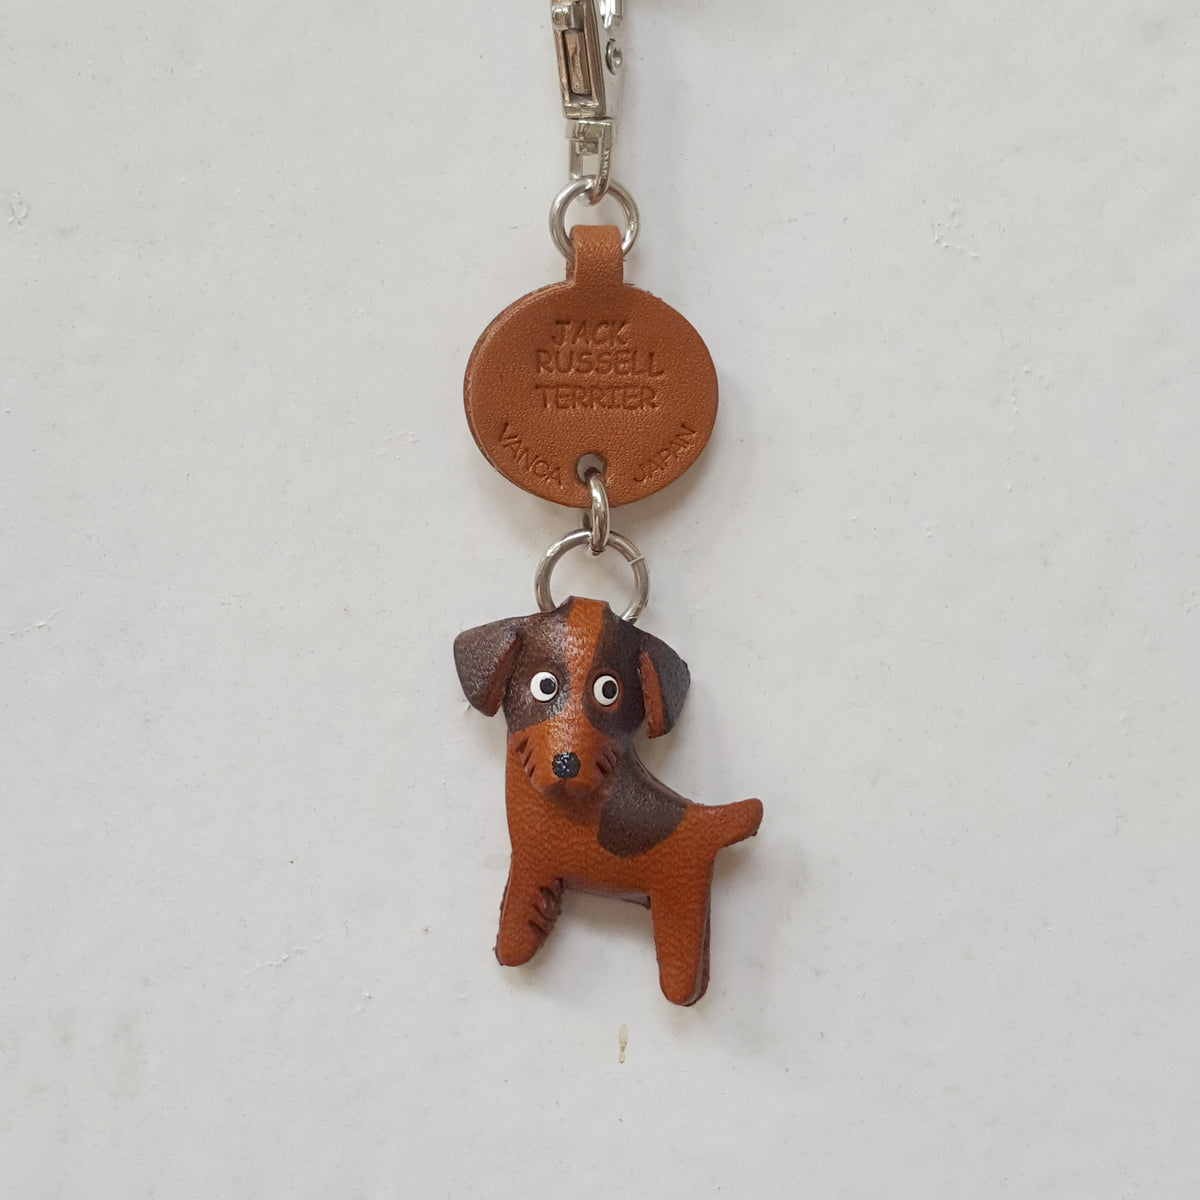 JACK RUSSELL TERRIER KEYCHAIN